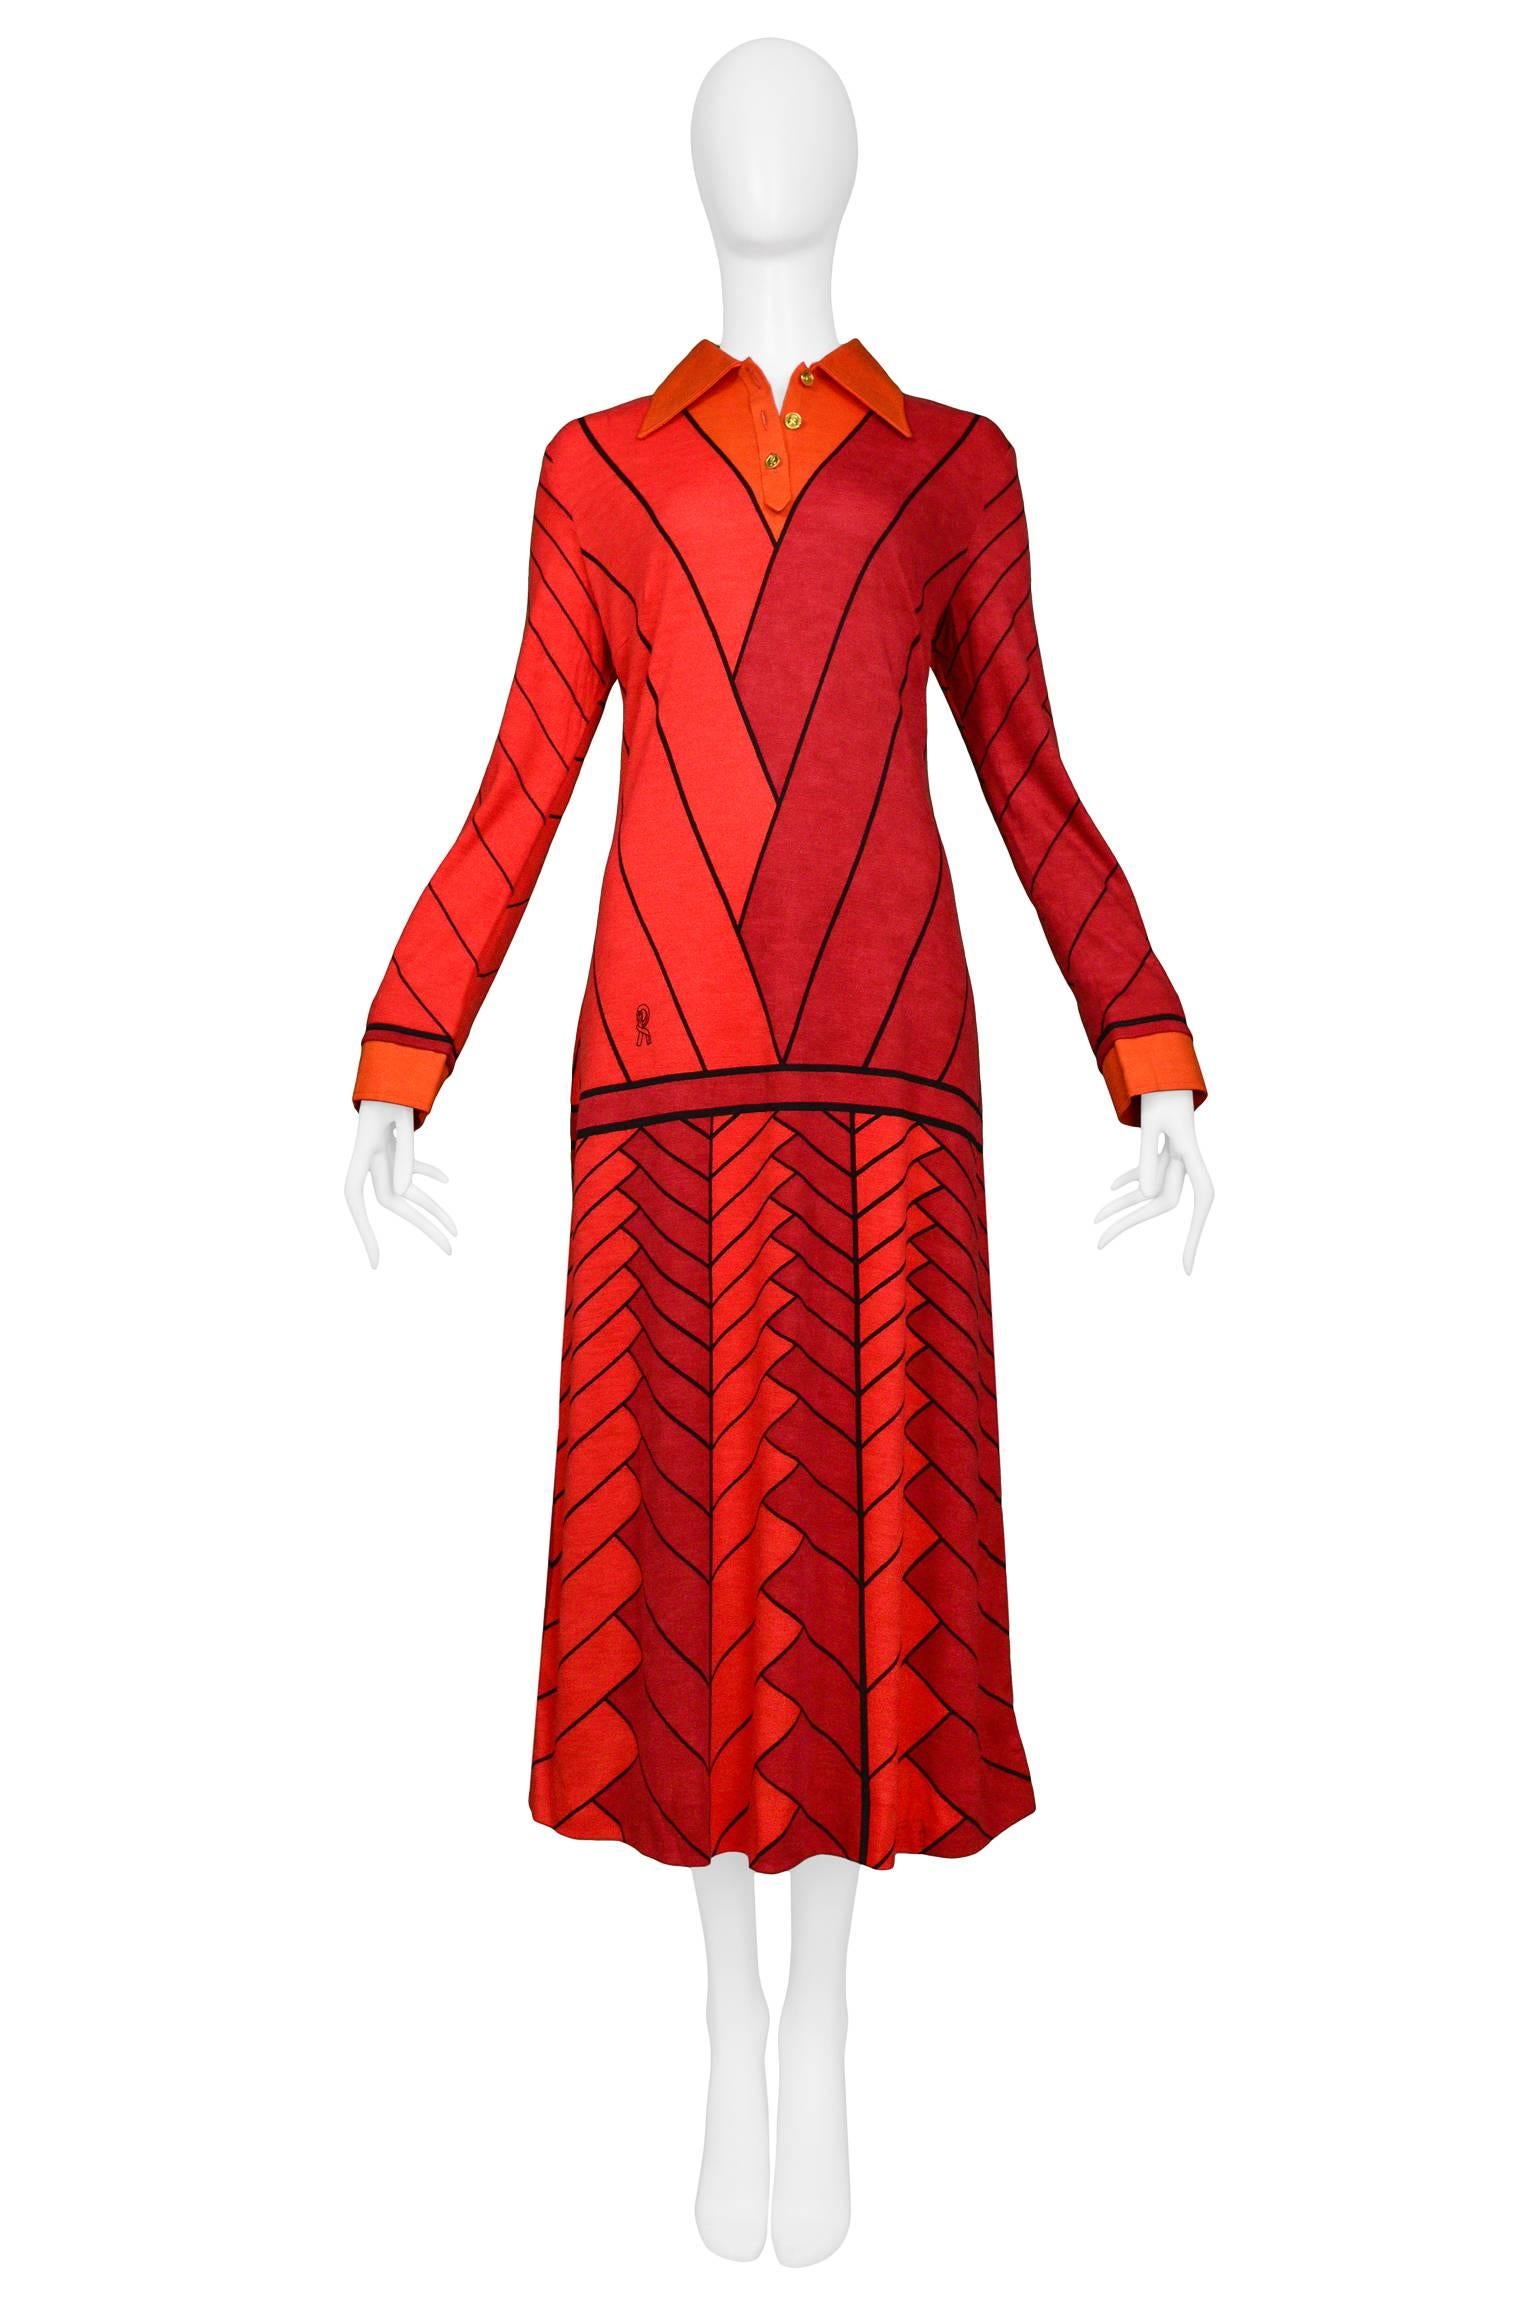 Vintage red on red Roberta di Camerino trompe l'oeil wool maxi dress with sleeves. Dress features signature Roberta print and gold tone 